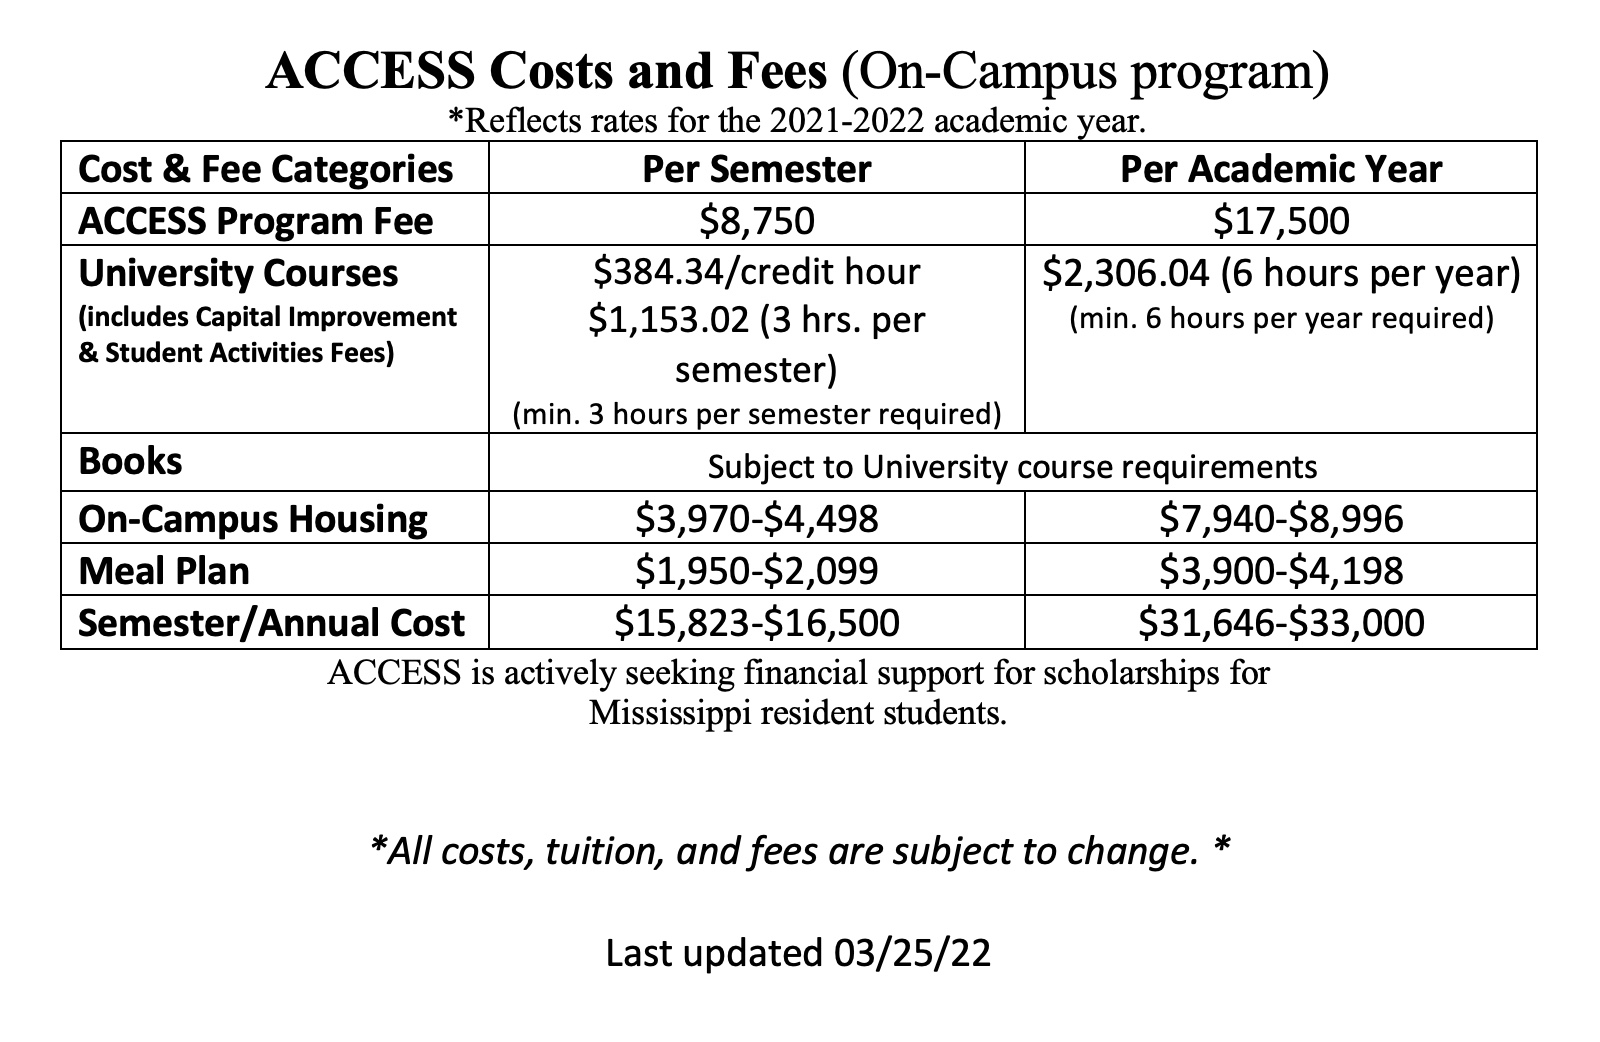 2021-22 On-Campus Cost and Fees